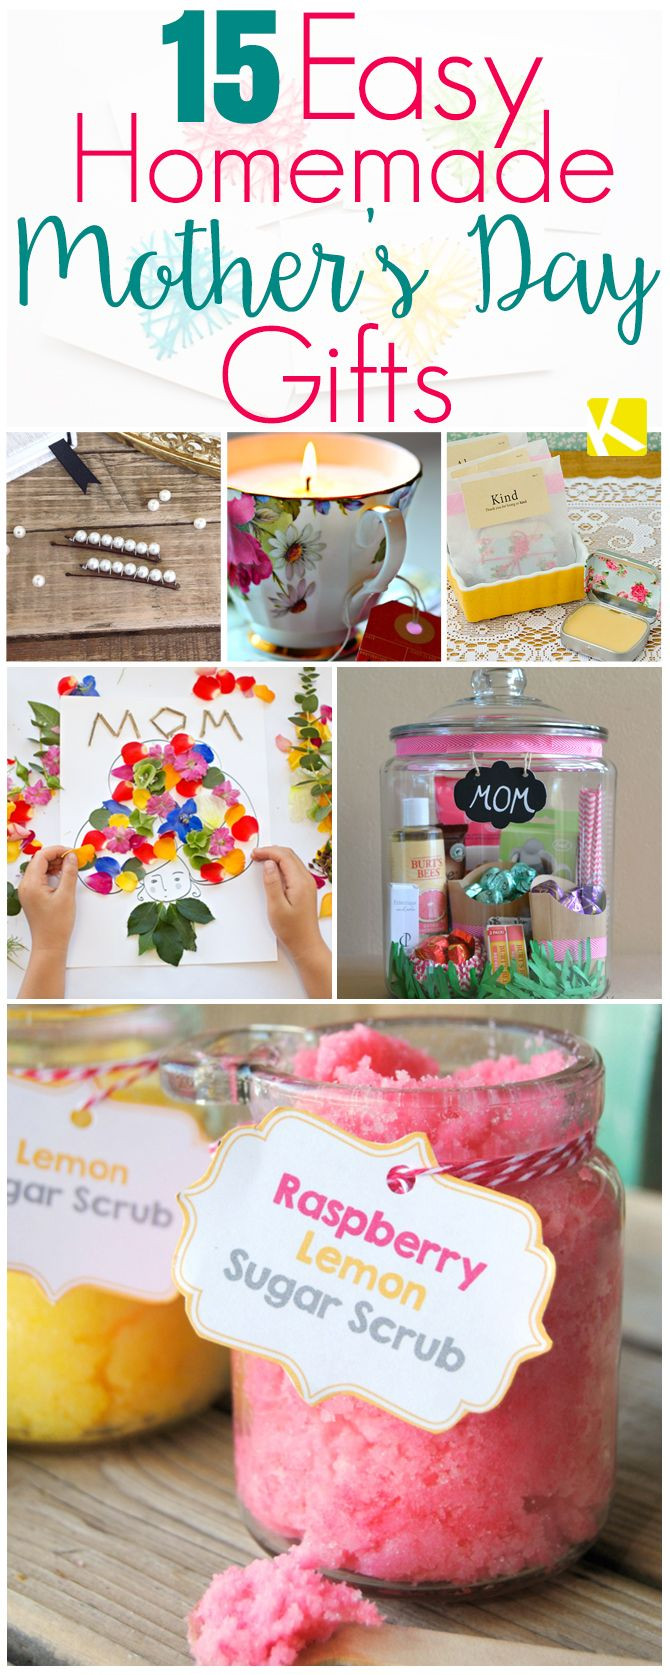 Mothers Day Gift Ideas For Kids To Make
 15 Mother’s Day Gifts That Are Ridiculously Easy to Make